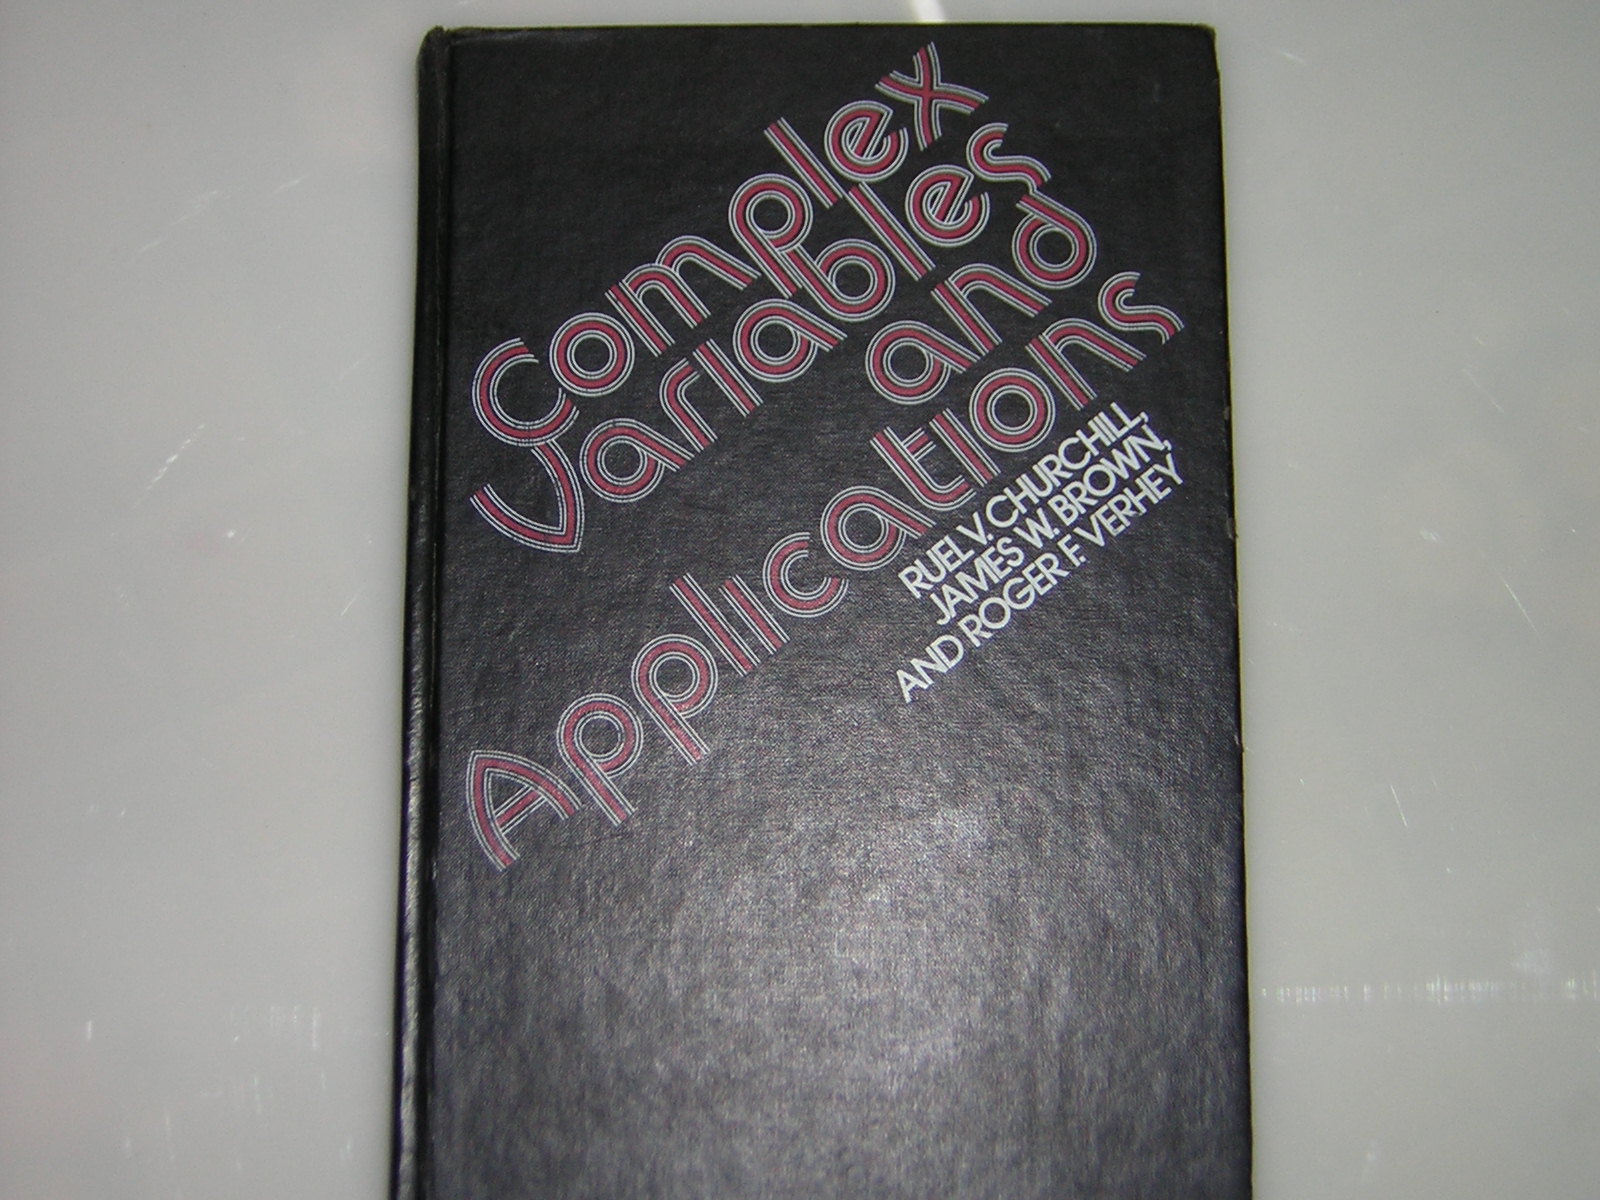 Complex Variables and applications, 3rd ed 詳細資料